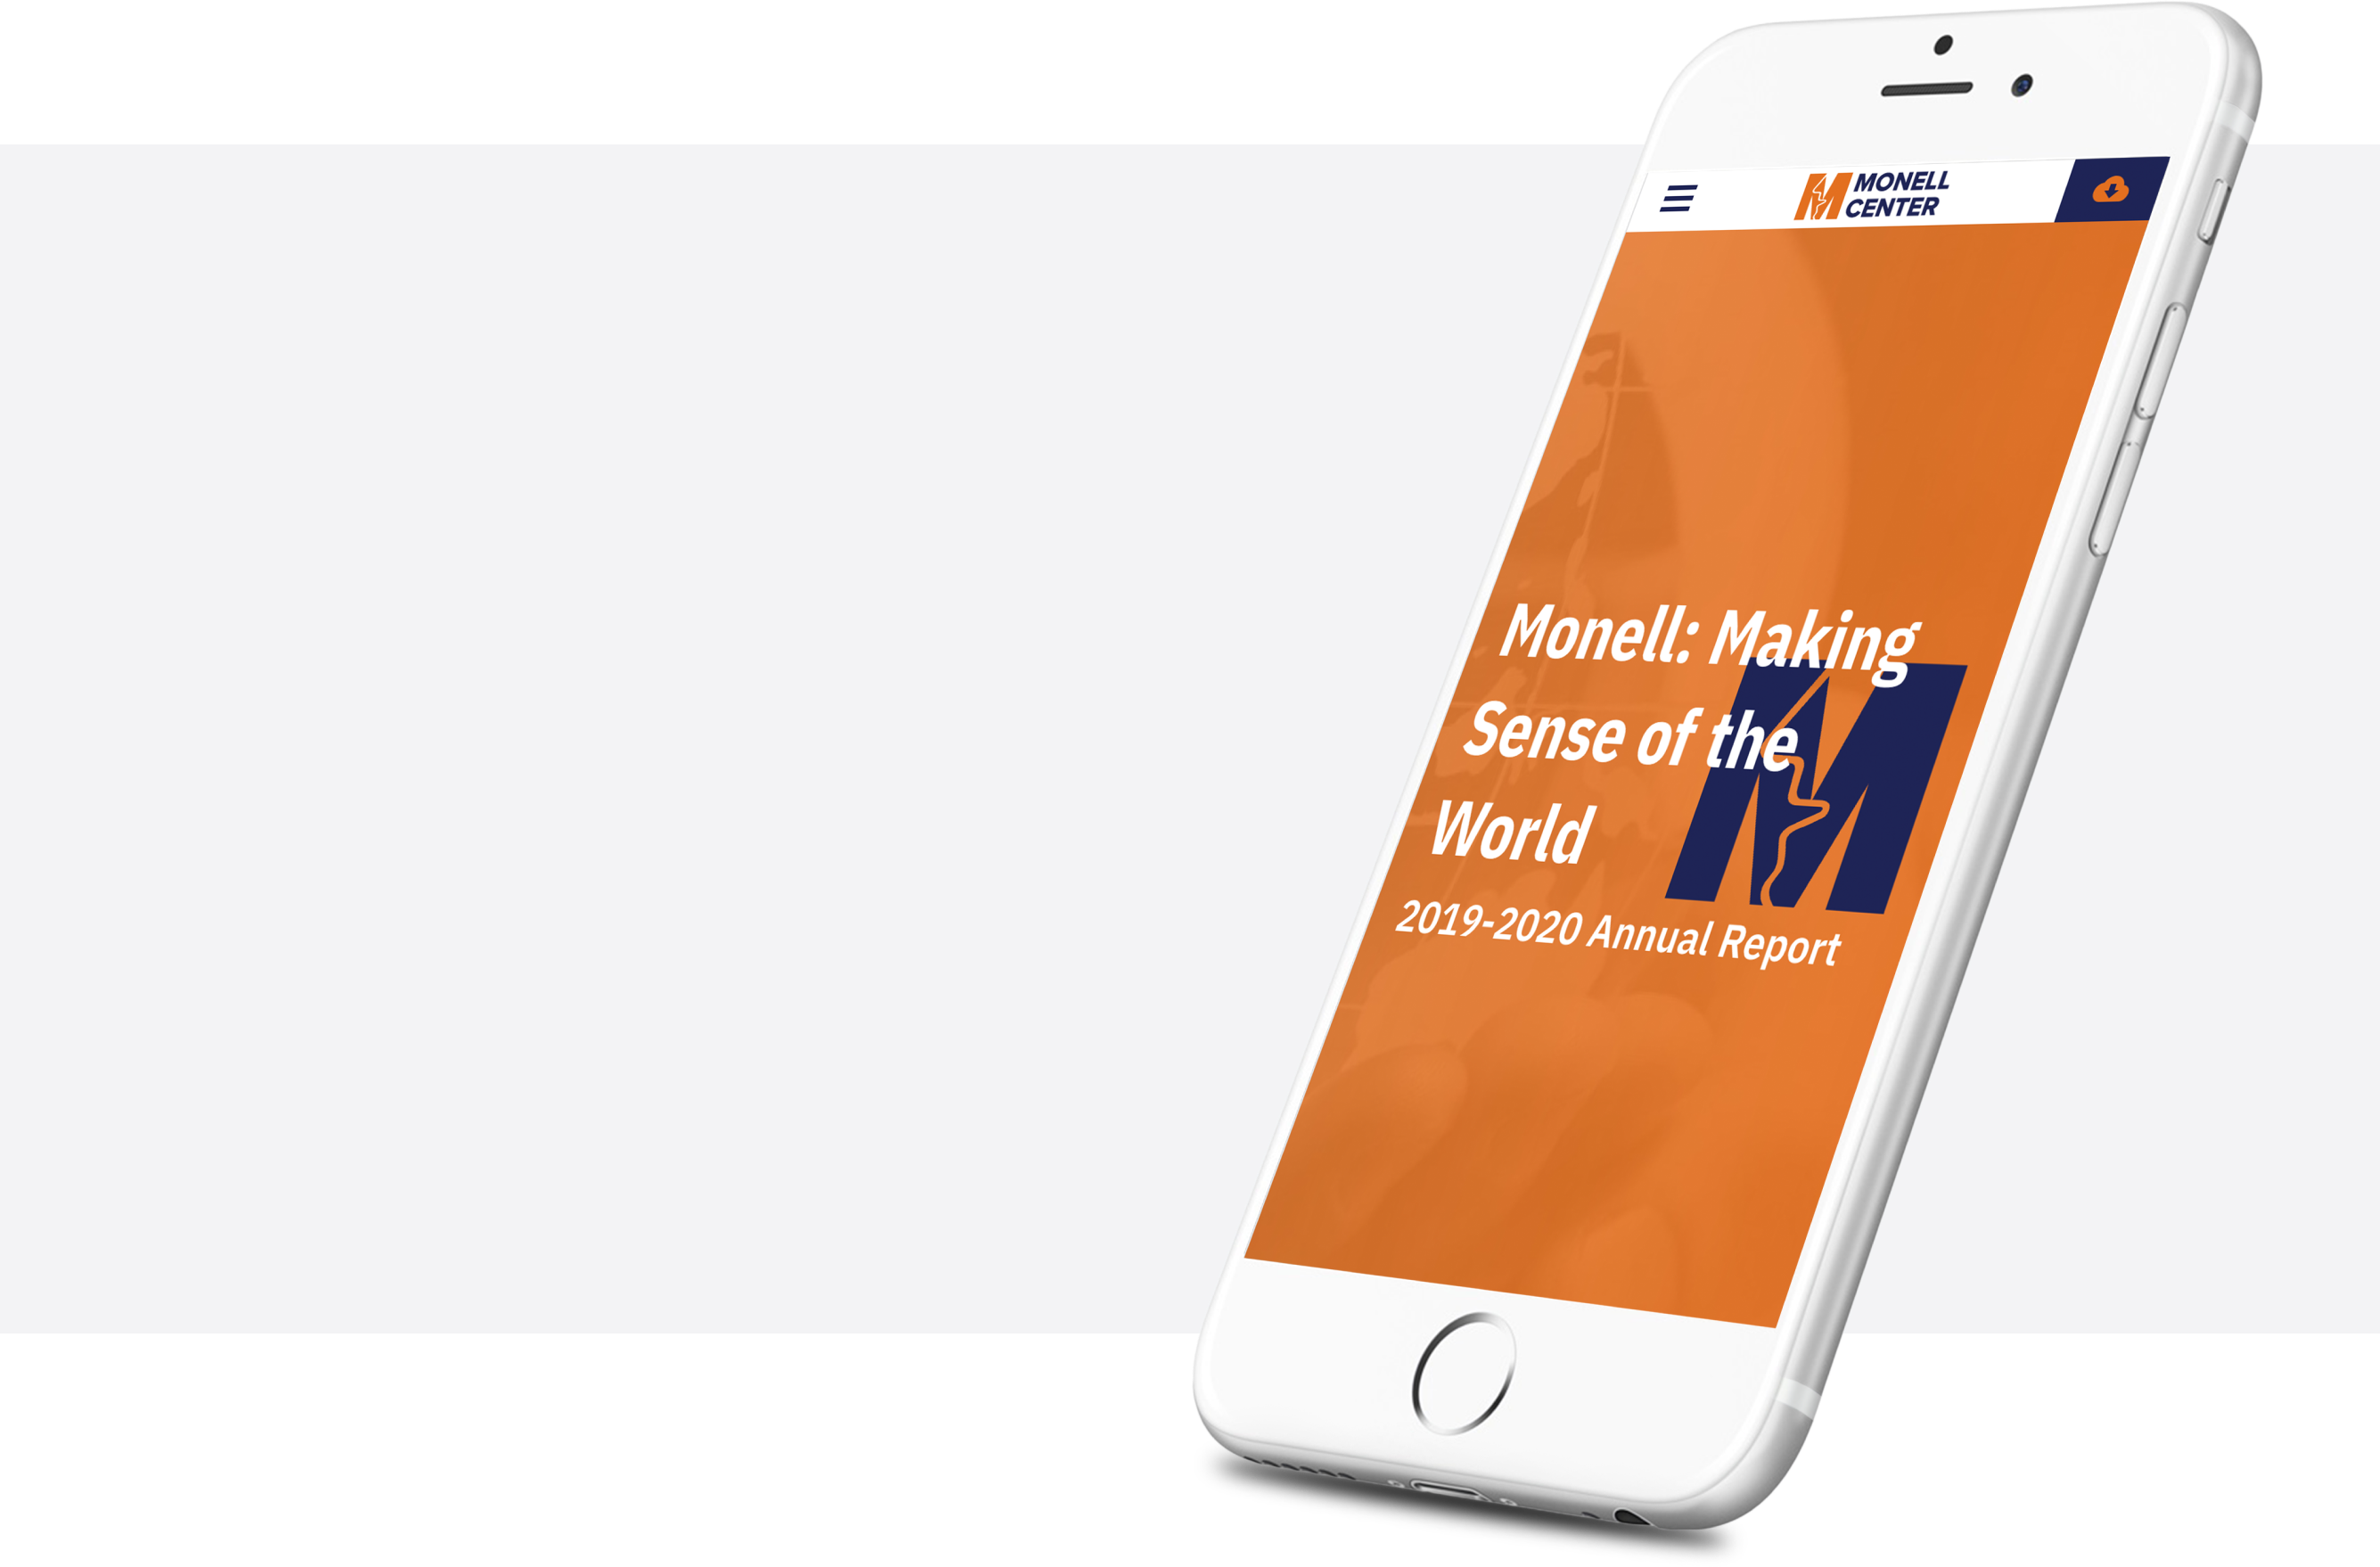 The Monell report - a white headline on an orange field with a large blue M - displayed on a smartphone screen